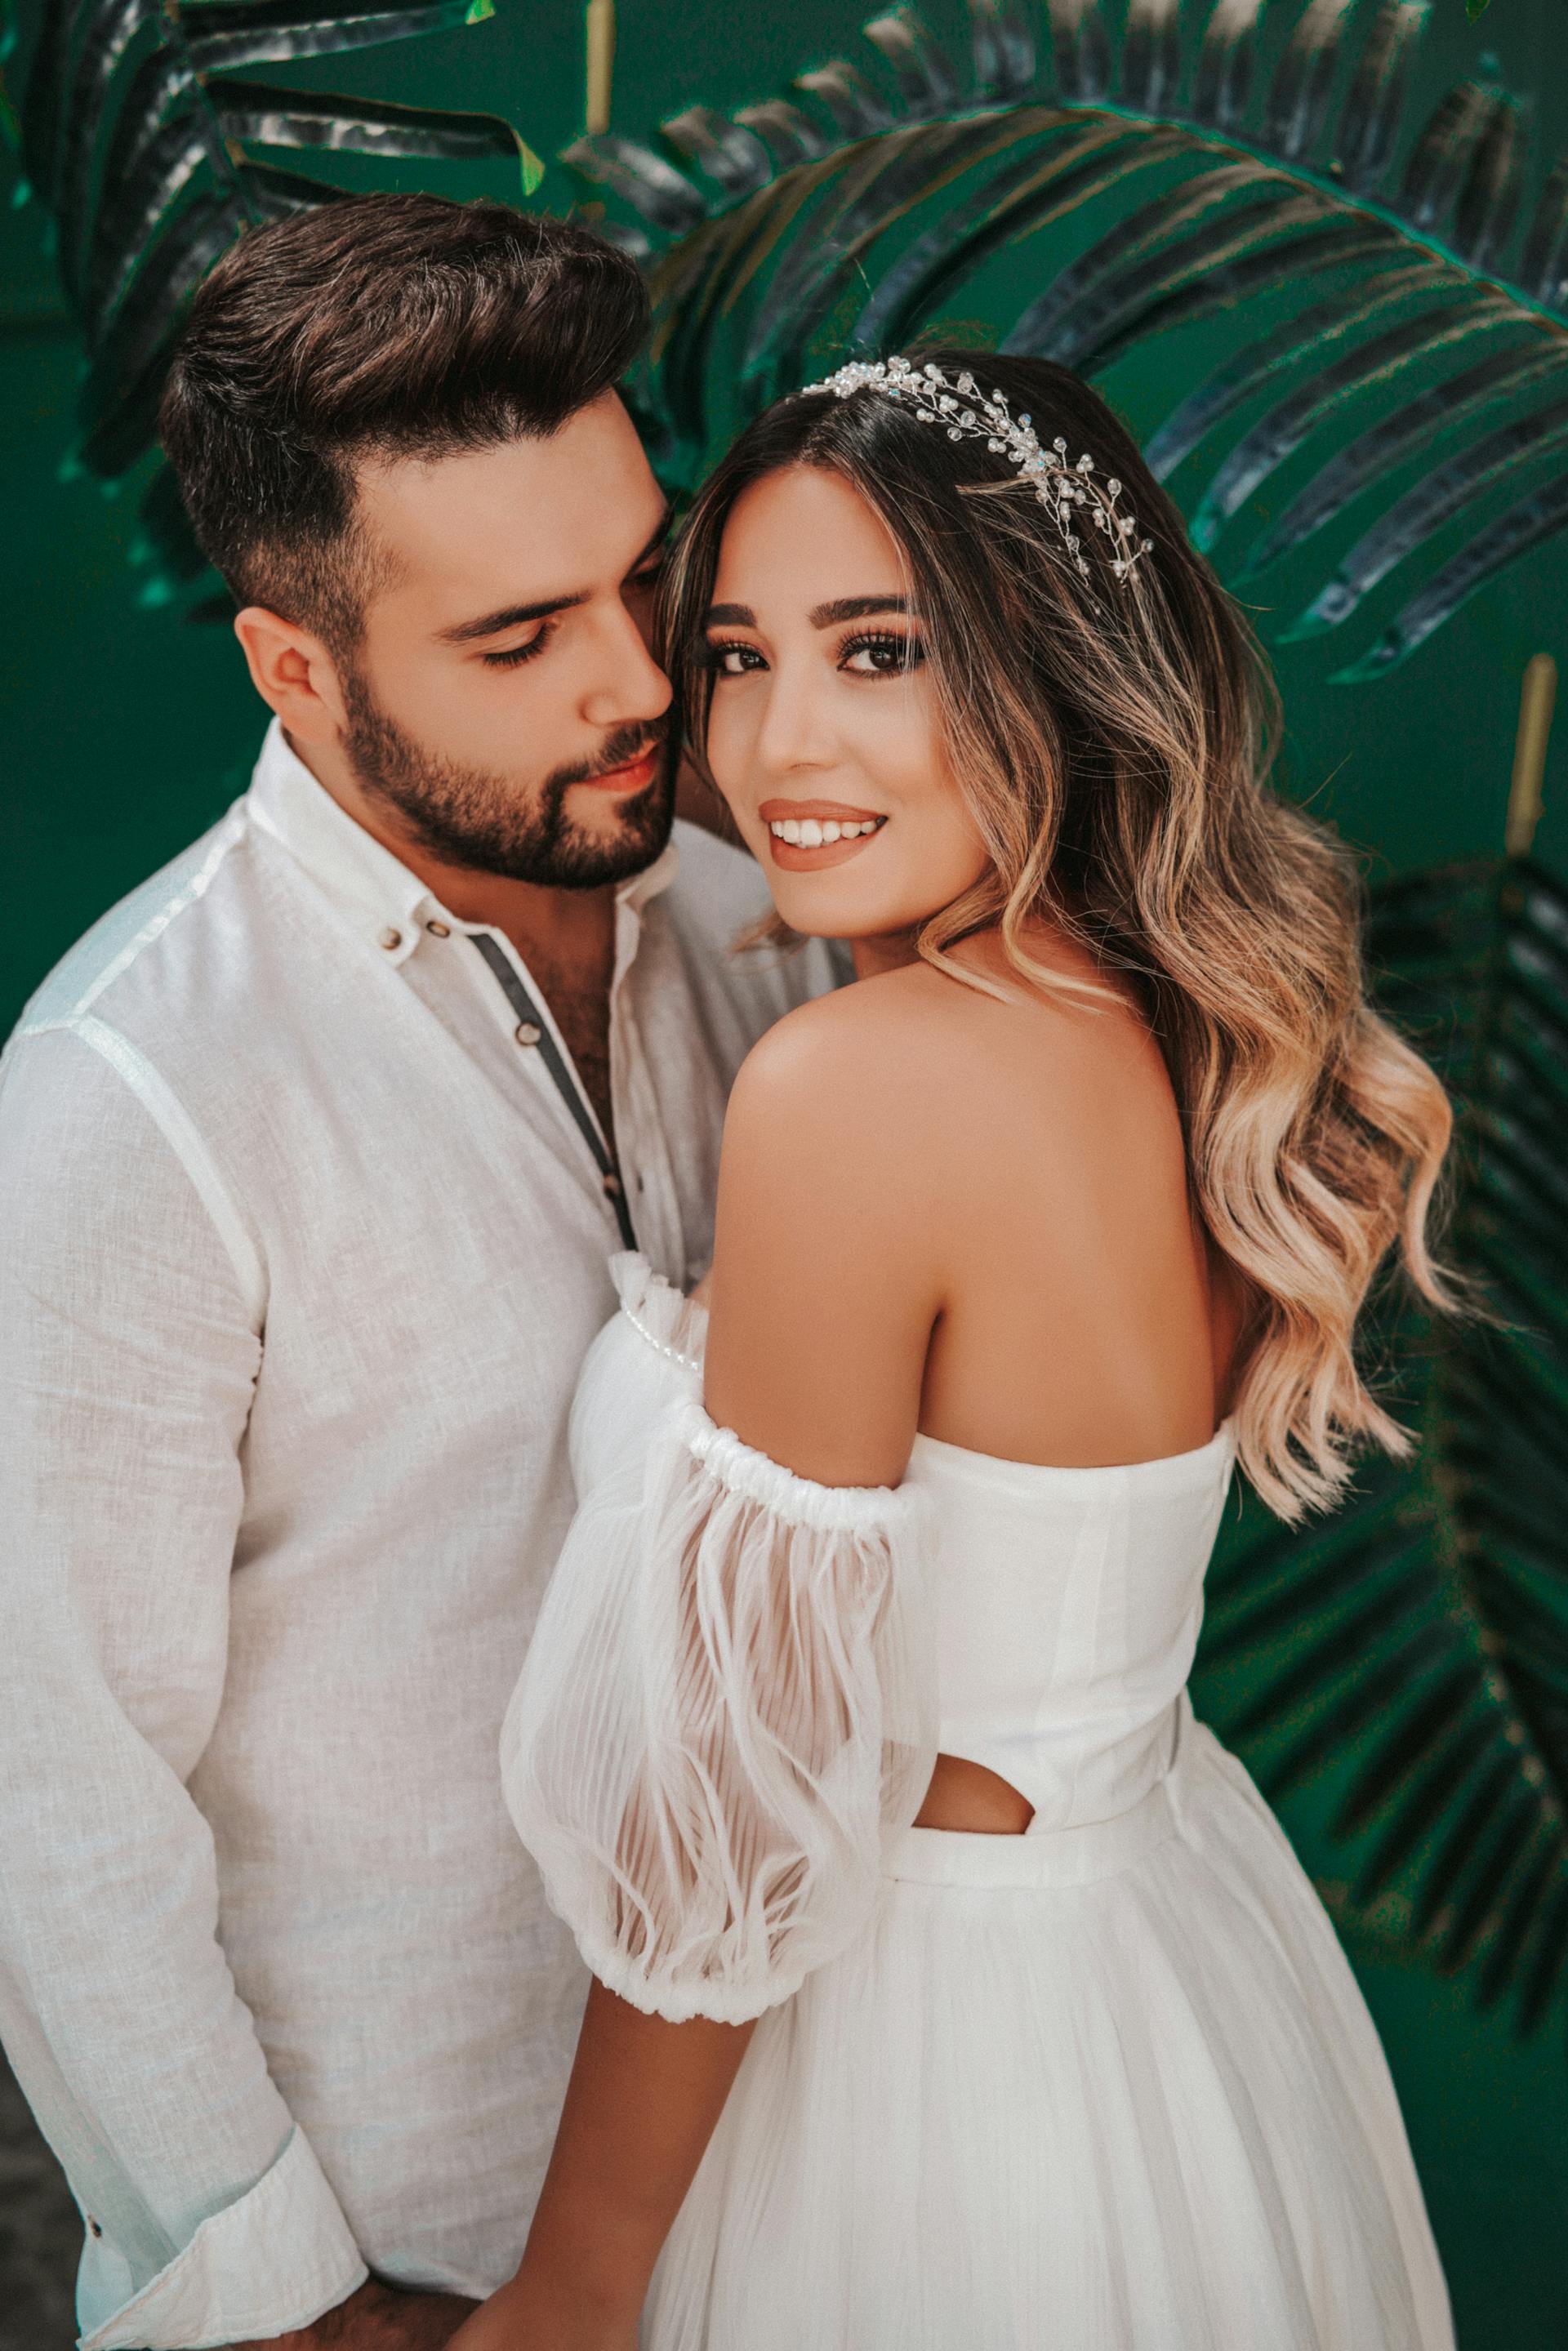 A young bridal couple | Source: Pexels